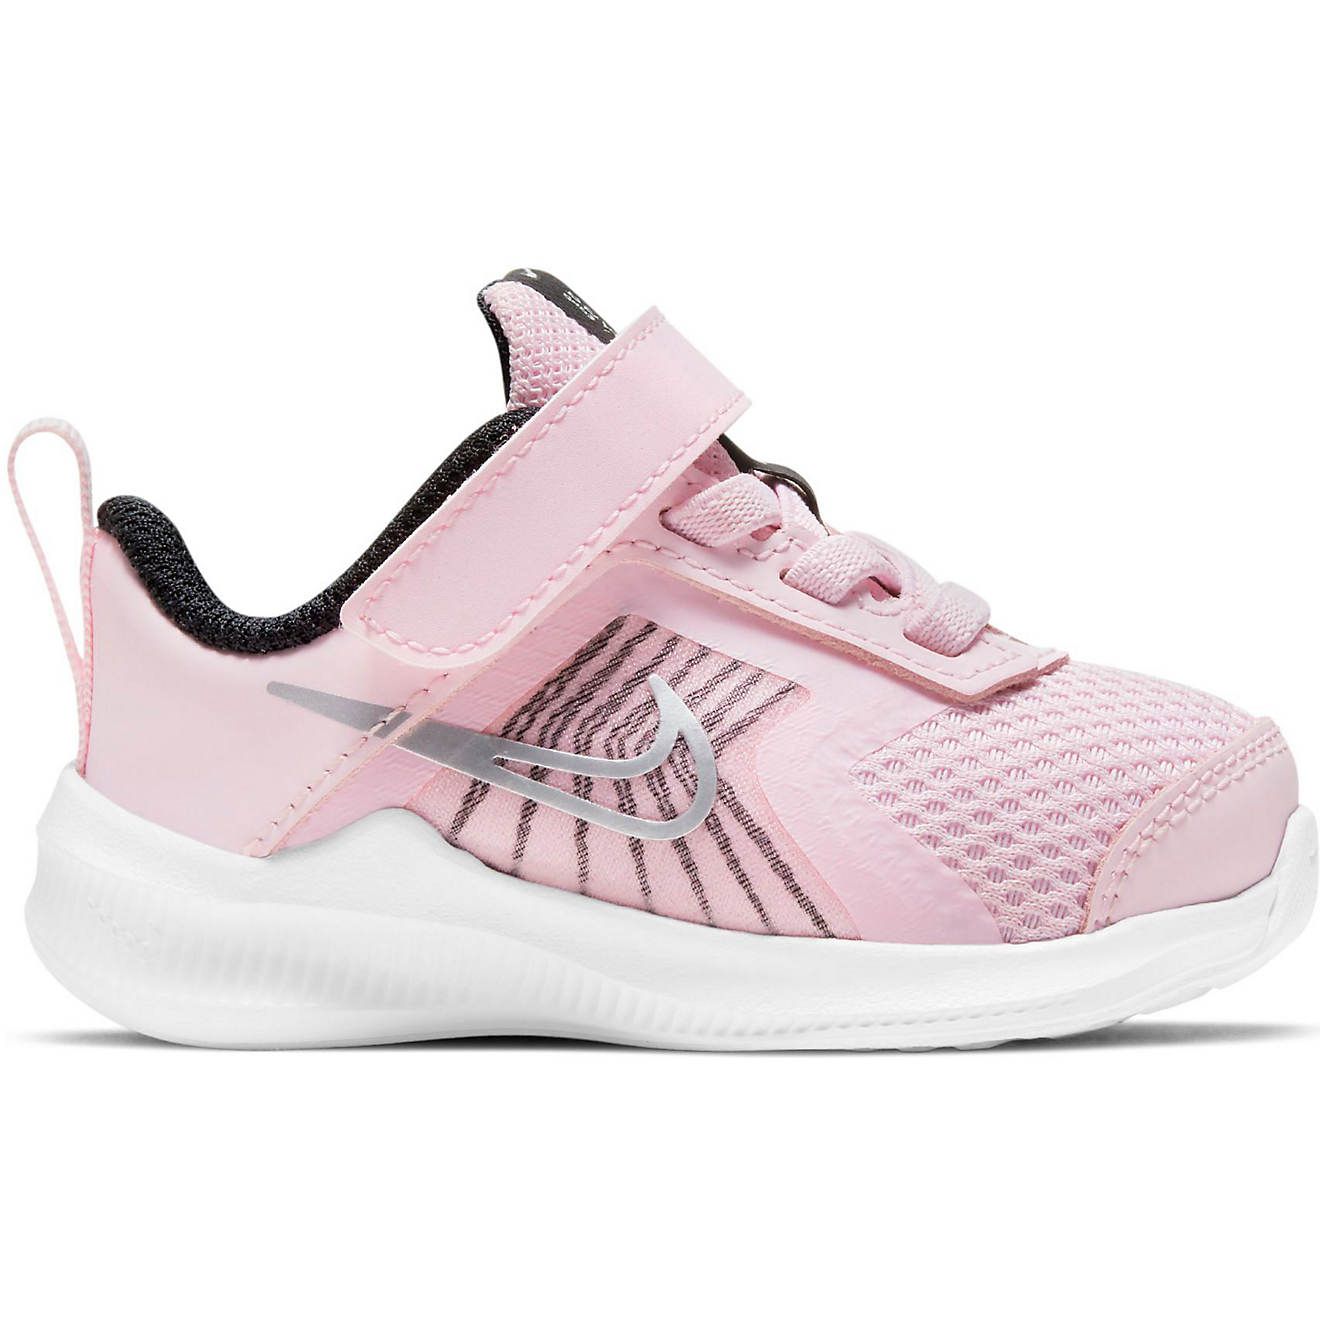 Nike Toddlers' Downshifter 11 Shoes | Academy | Academy Sports + Outdoors